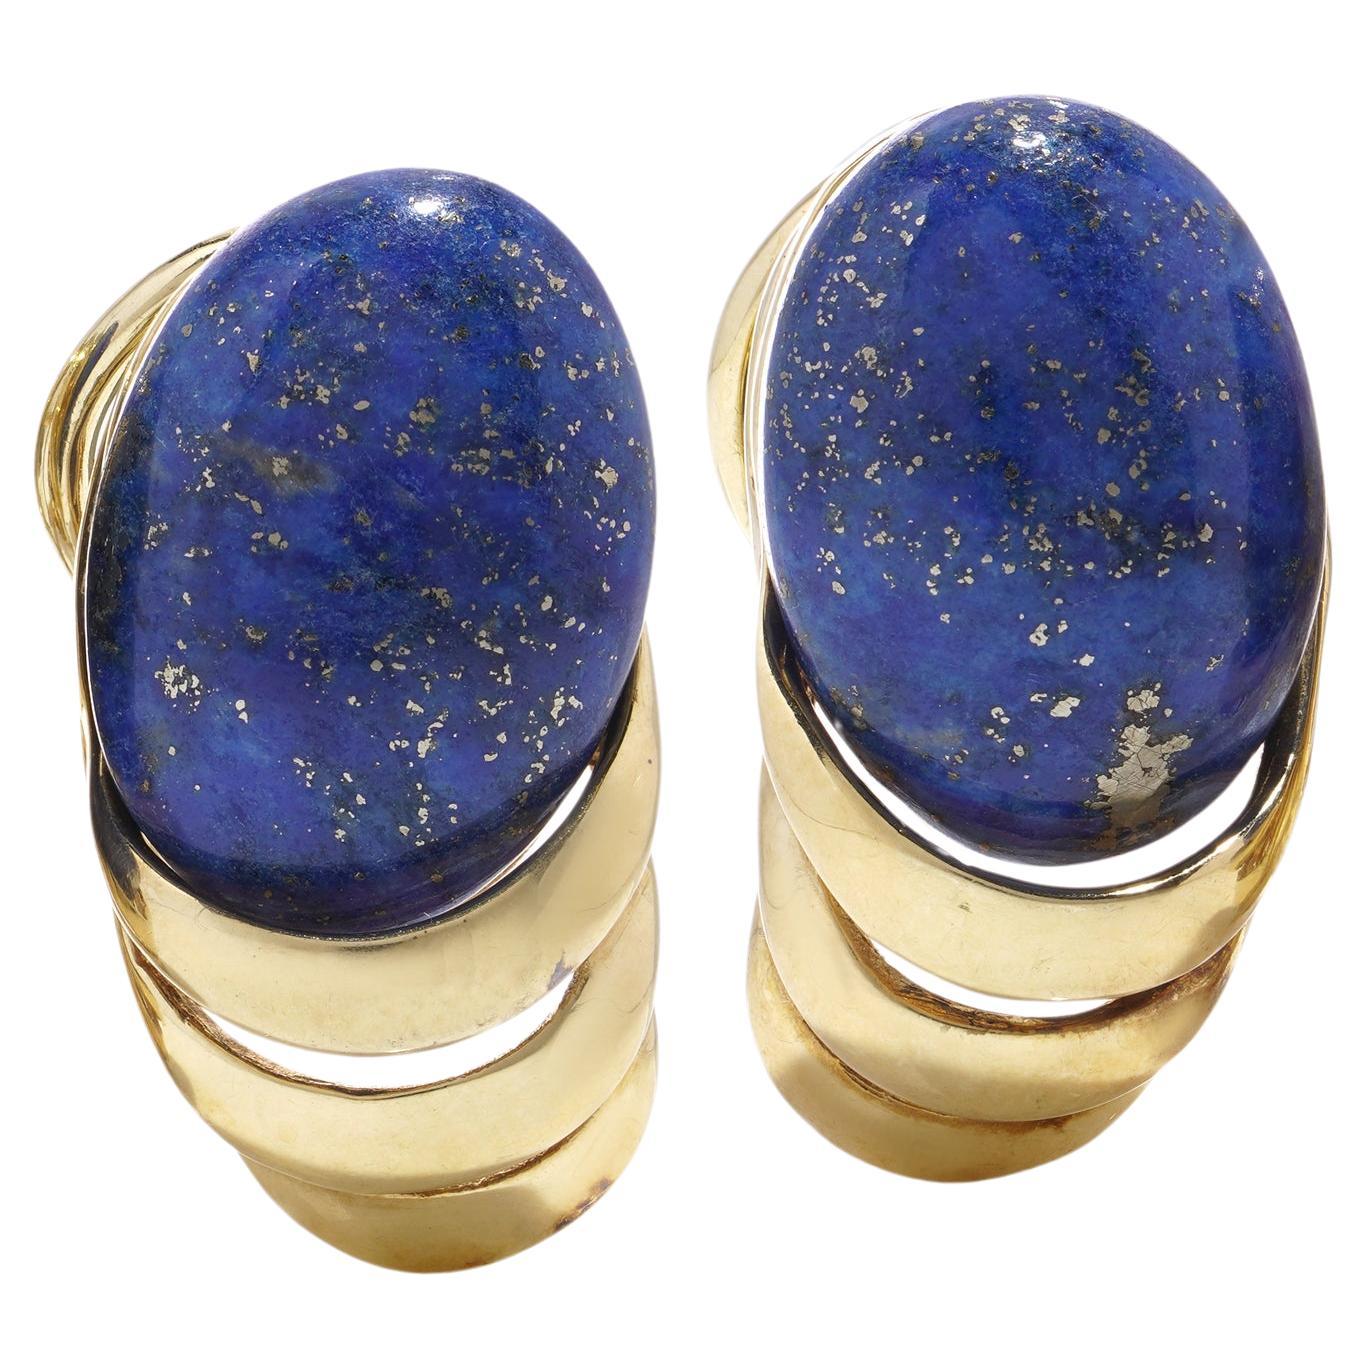  14kt Yellow Gold Clip-On Stud Earrings with Oval Cabochon Lapis Lazuli For Sale